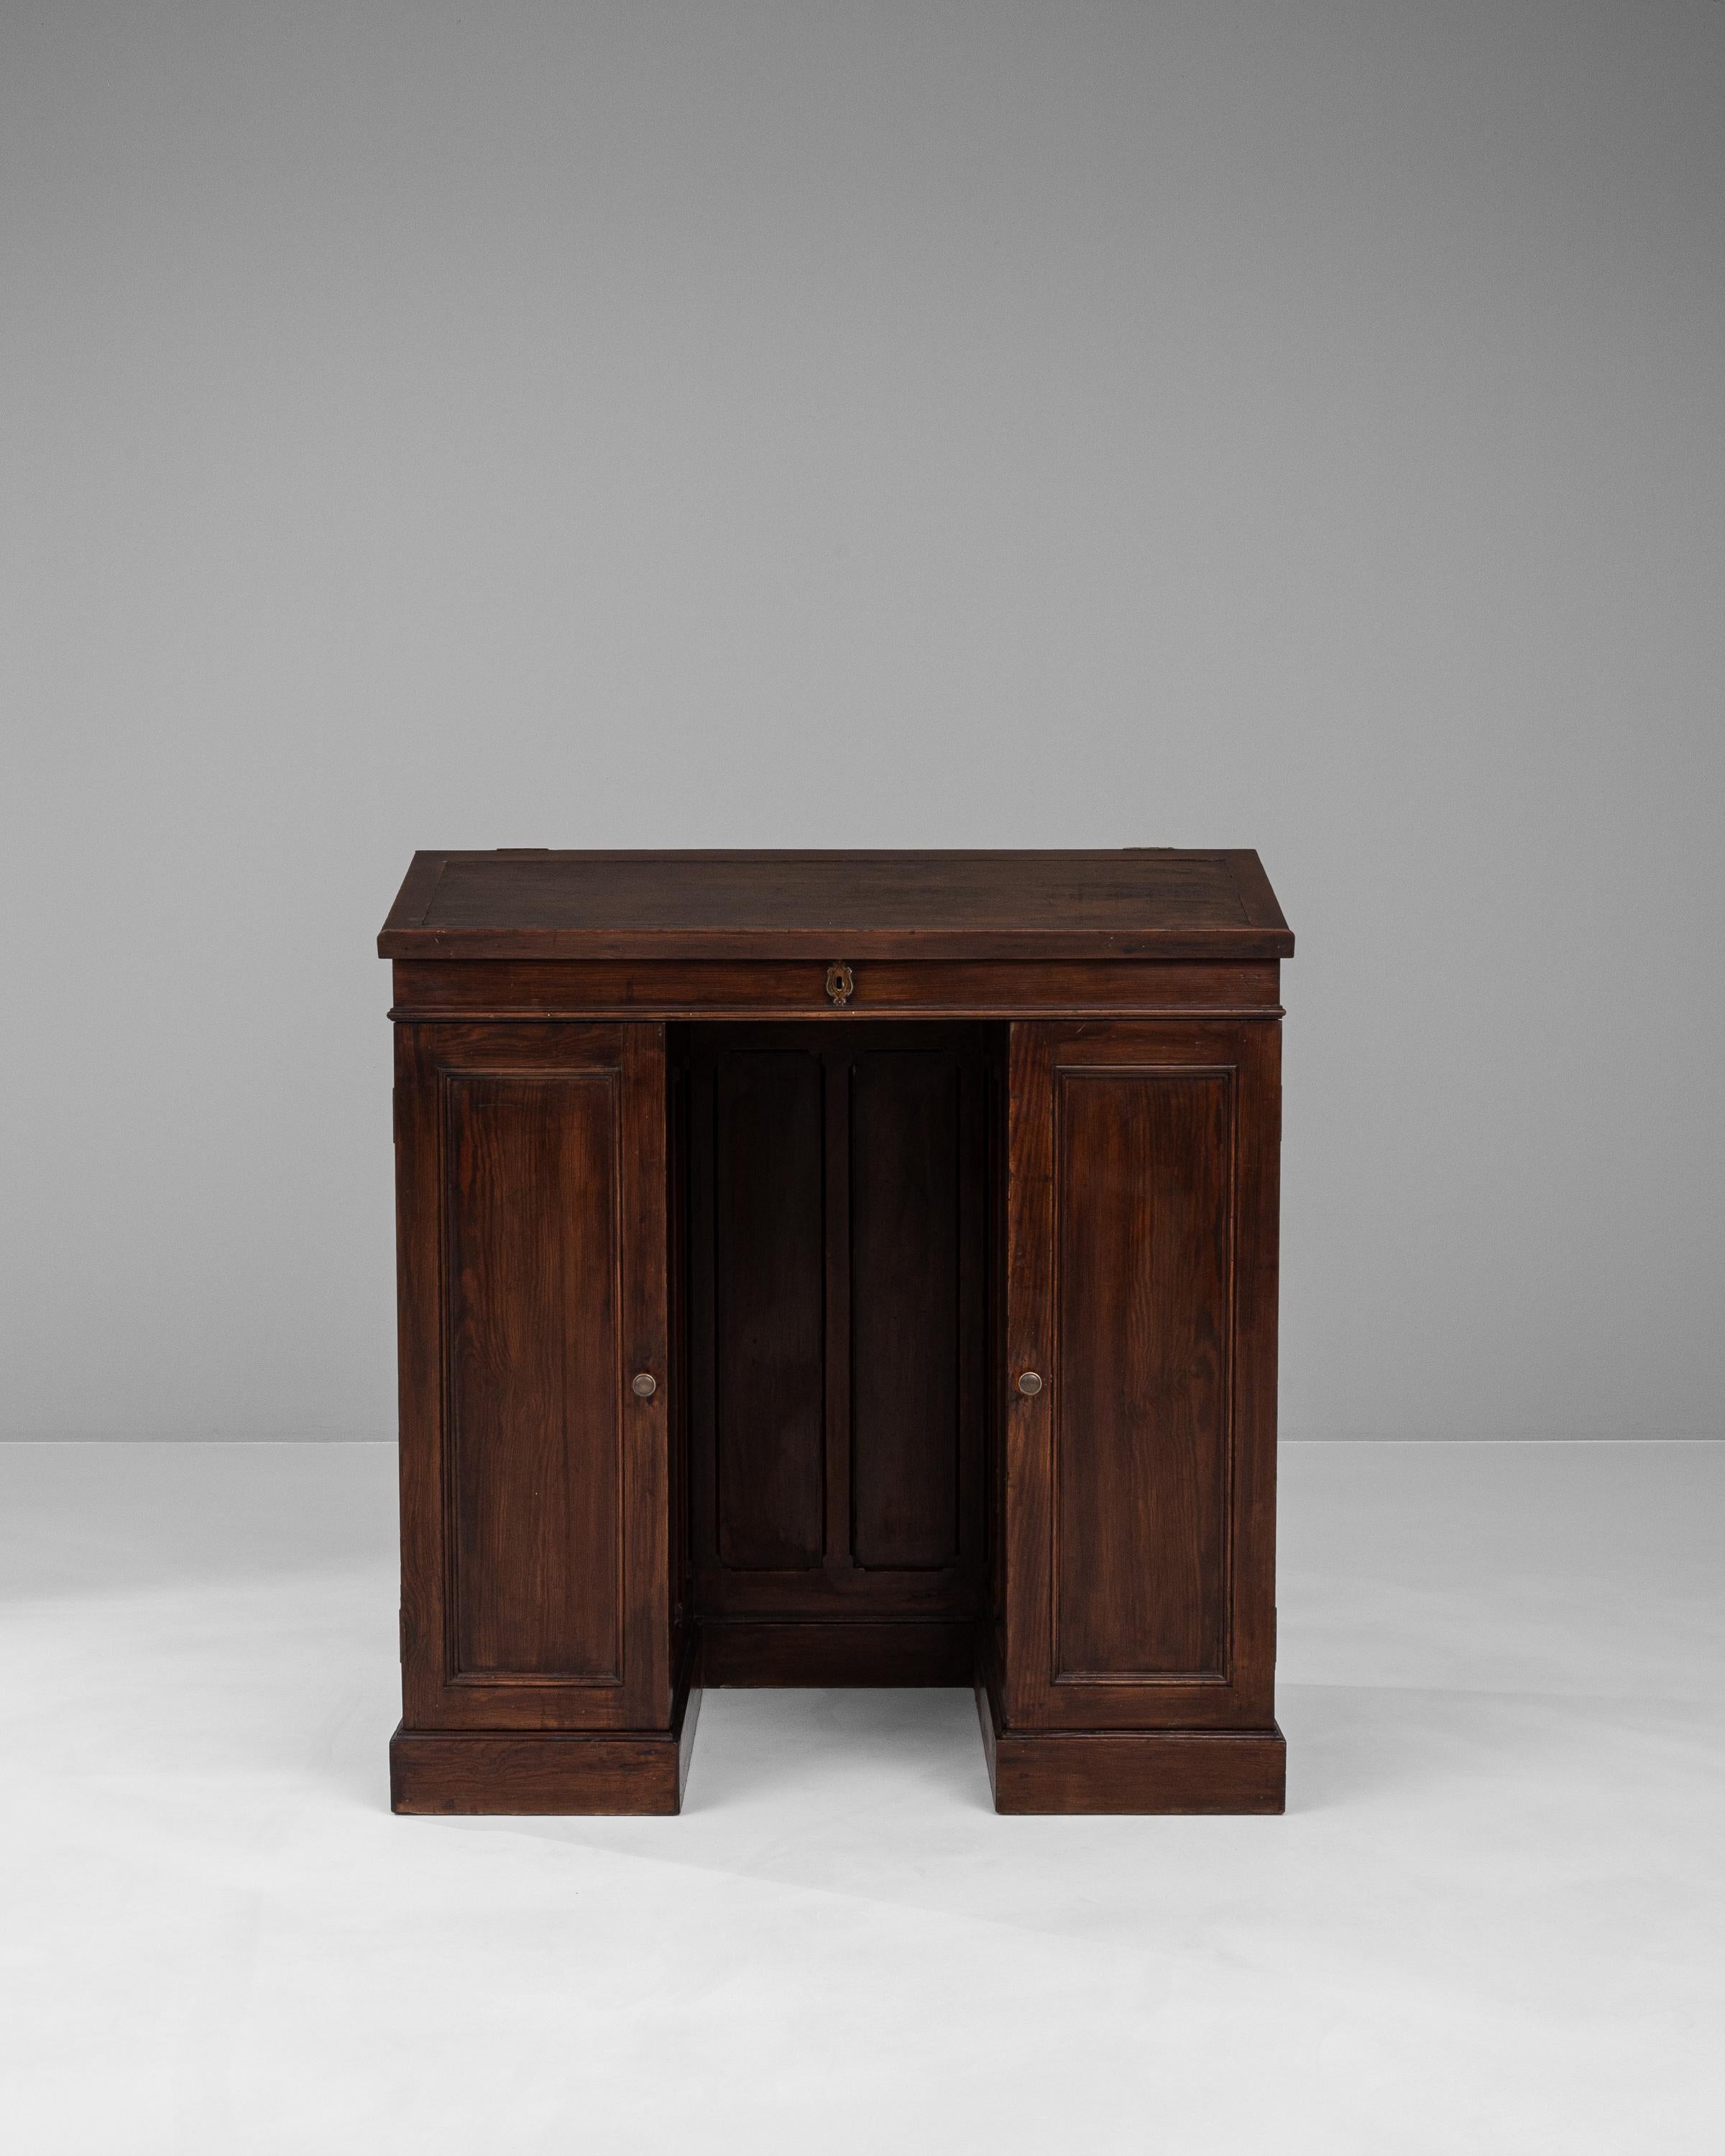 Experience the rich history and craftsmanship of the early 1900s with this French wooden desk, an exemplar of classic design and functionality. Constructed from deep-toned wood, this desk features a distinctive hinged top that lifts to reveal a